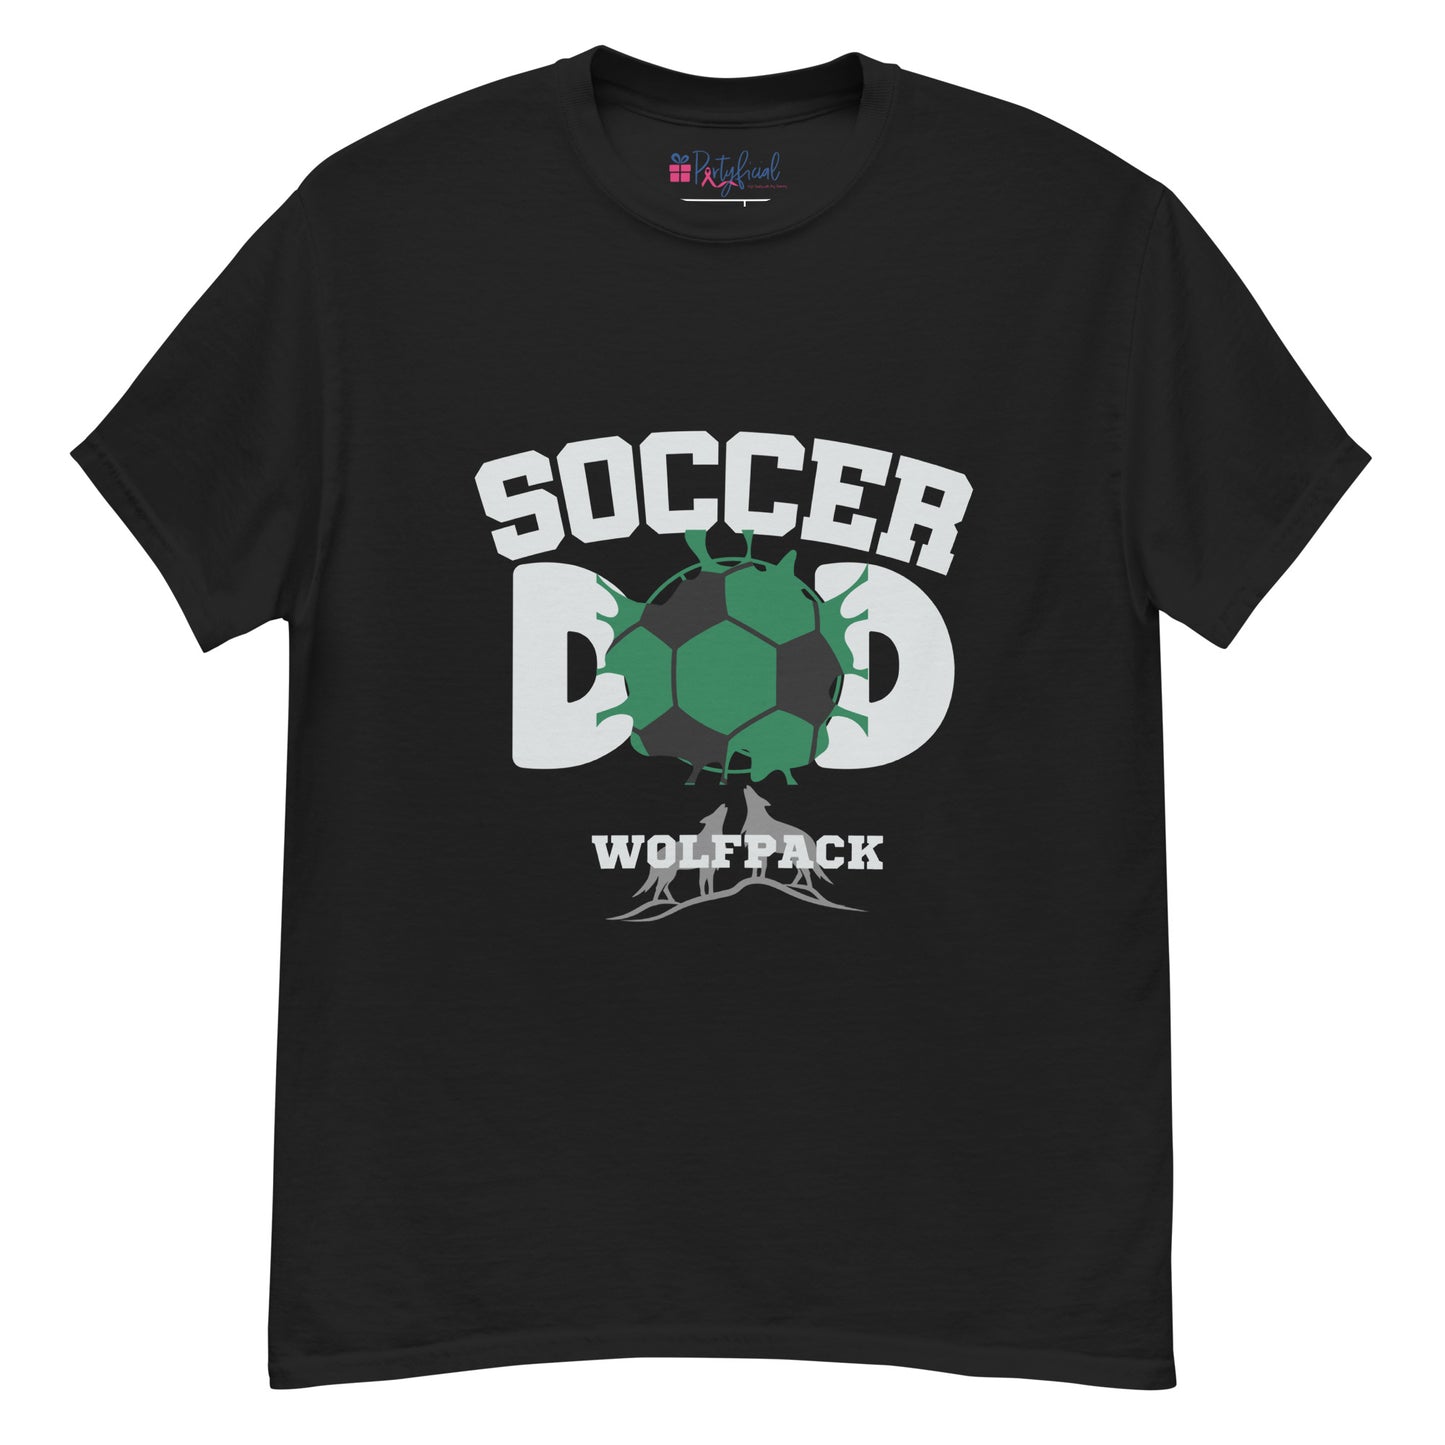 Soccer Dad- Wolf Pack tee